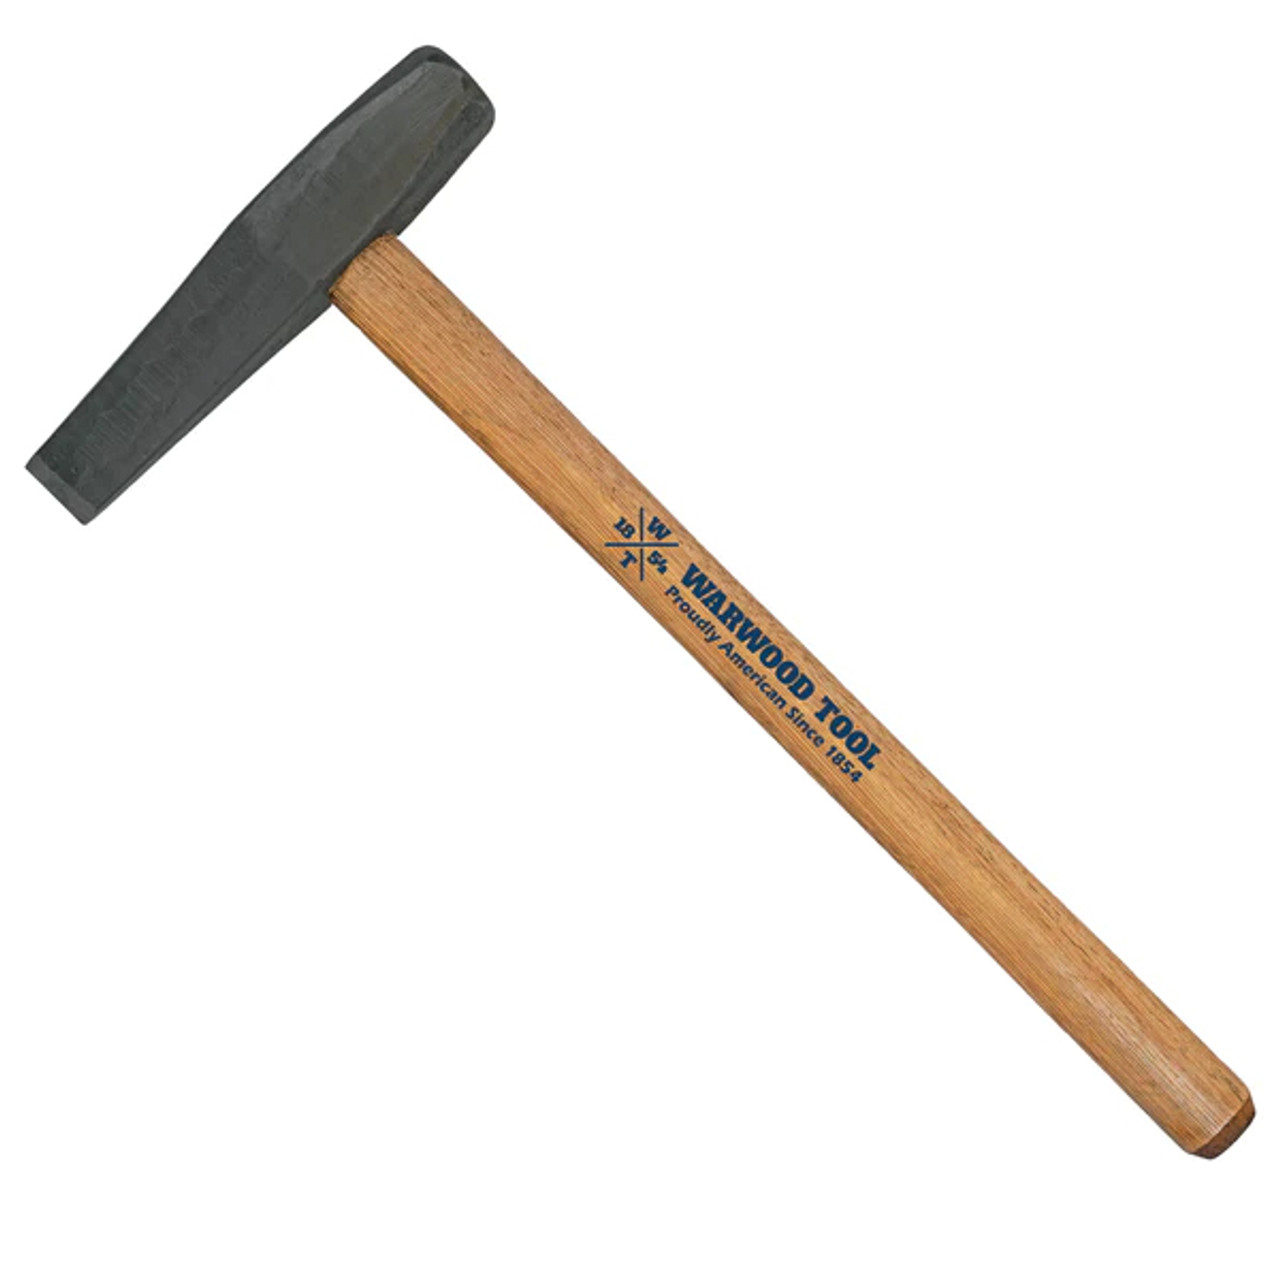 Warwood 51711 5-1/2 lb Grade B Nut Cutter (Square Cutter), 24" Hickory Handle